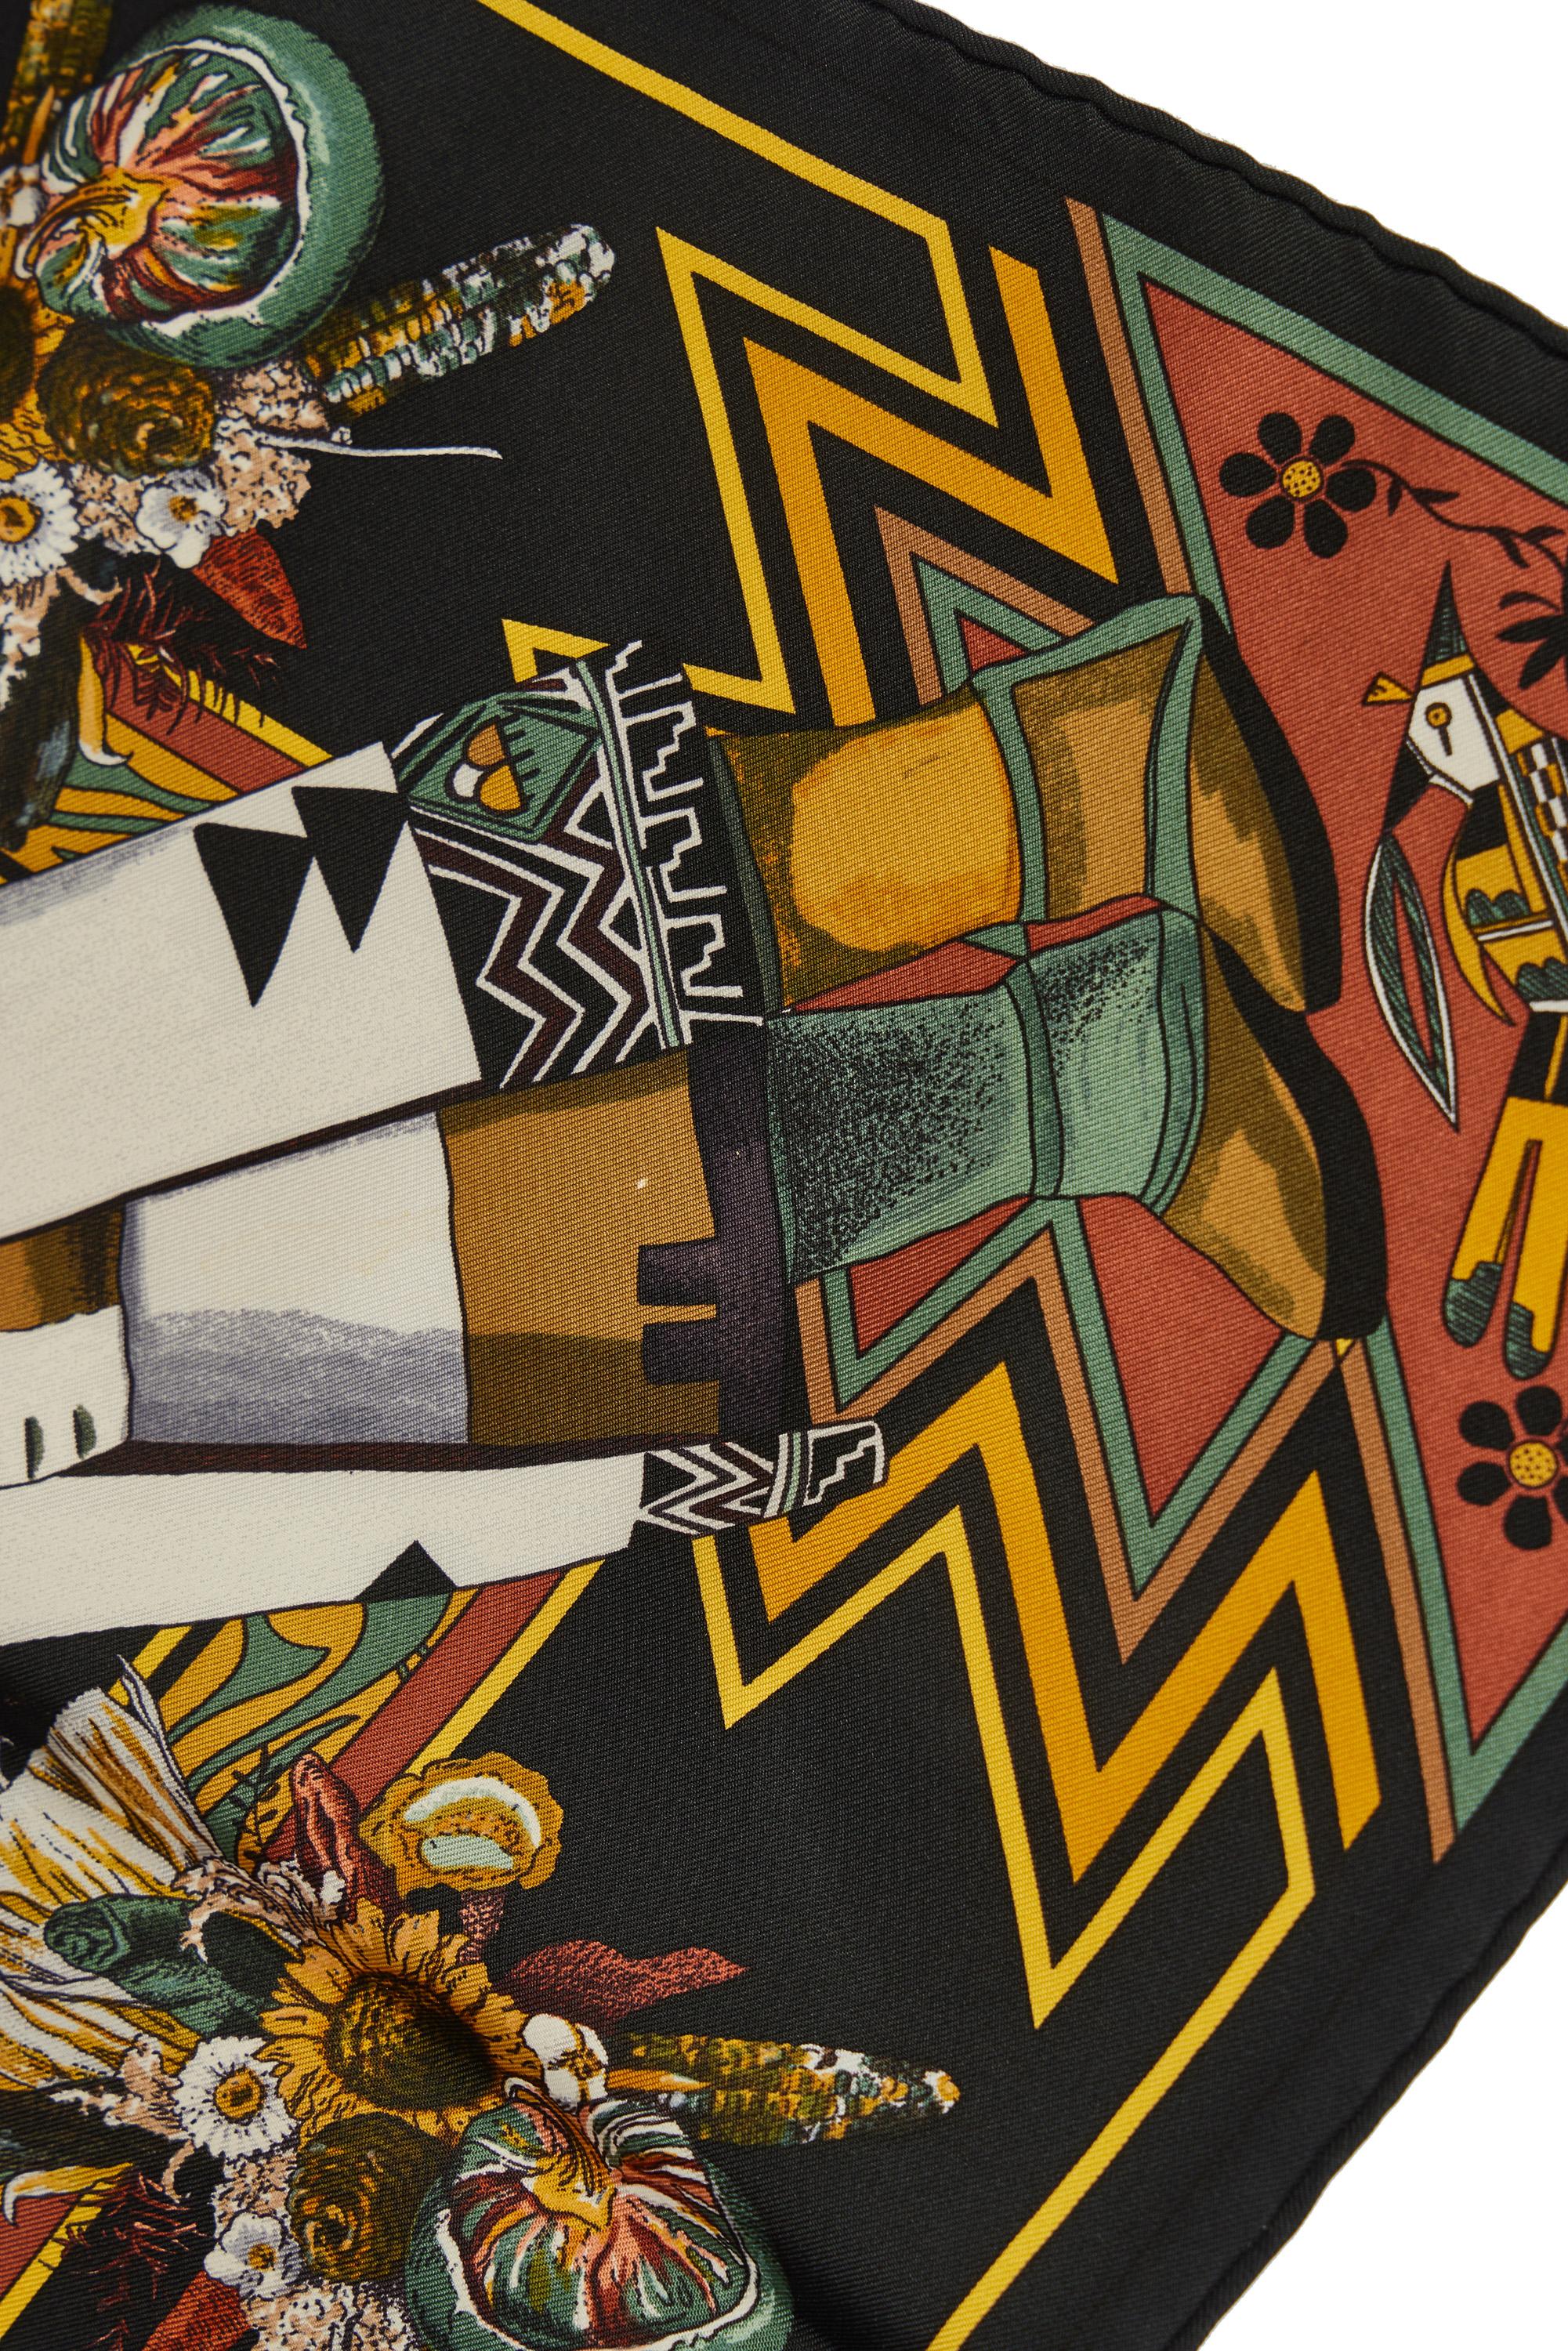 Kachinas Hermès silk print scarf by artist Kermit Oliver. Hand rolled edges. Black and brown color way. 